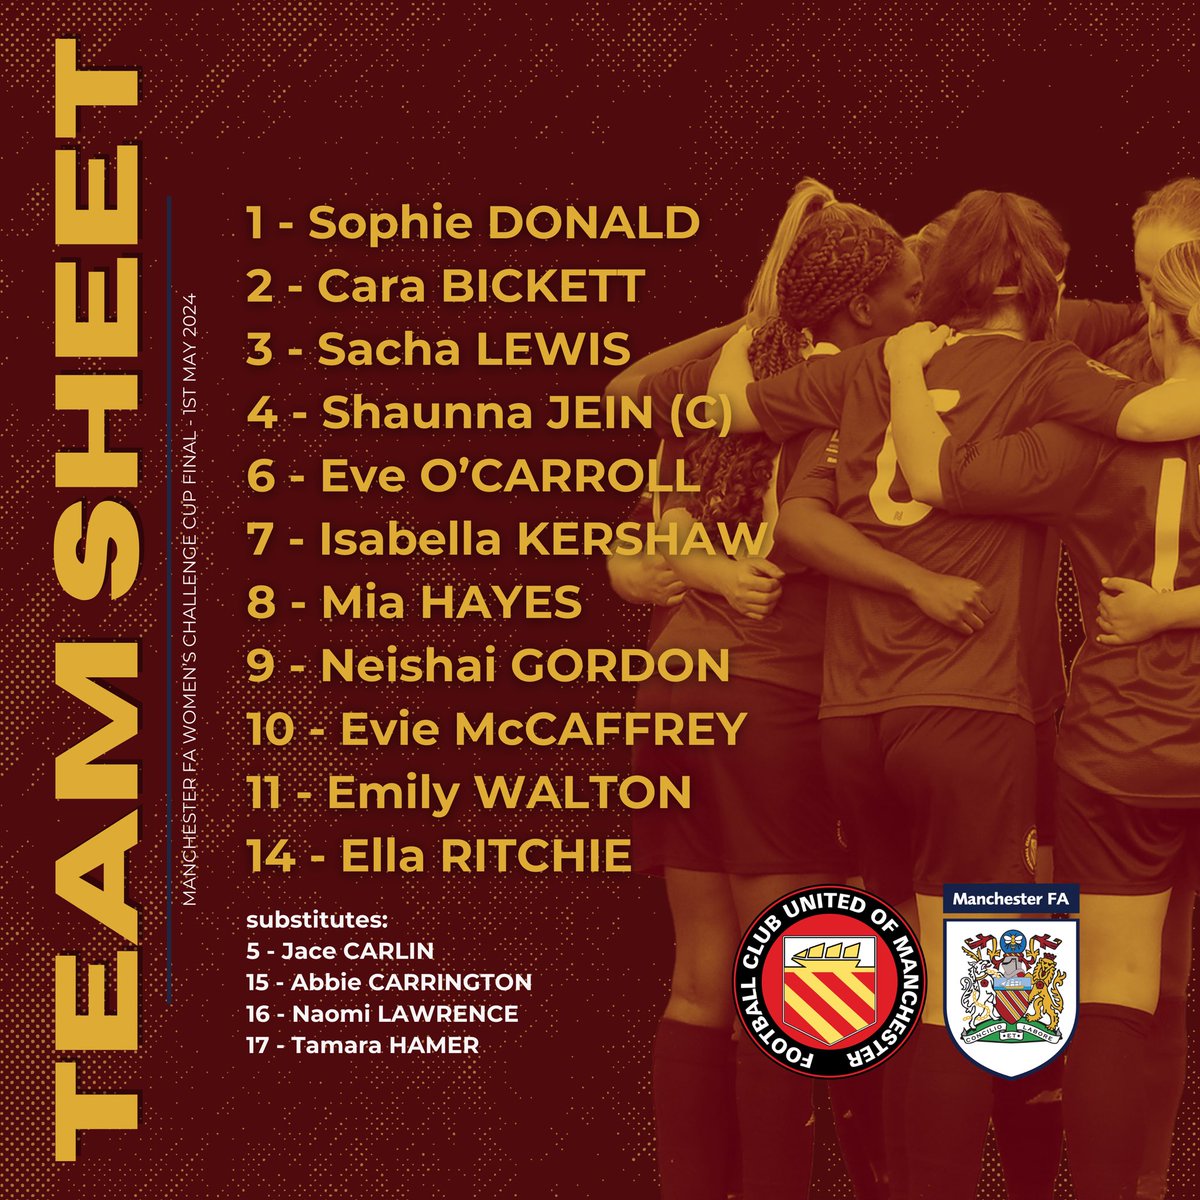 Your starting line up tonight as we battle it out for silverware - follow along right here via our Twitter/X page, tune into @fcumradio or watch the @Manchester_FA livestream on YouTube and show your support! ⚽️🔥